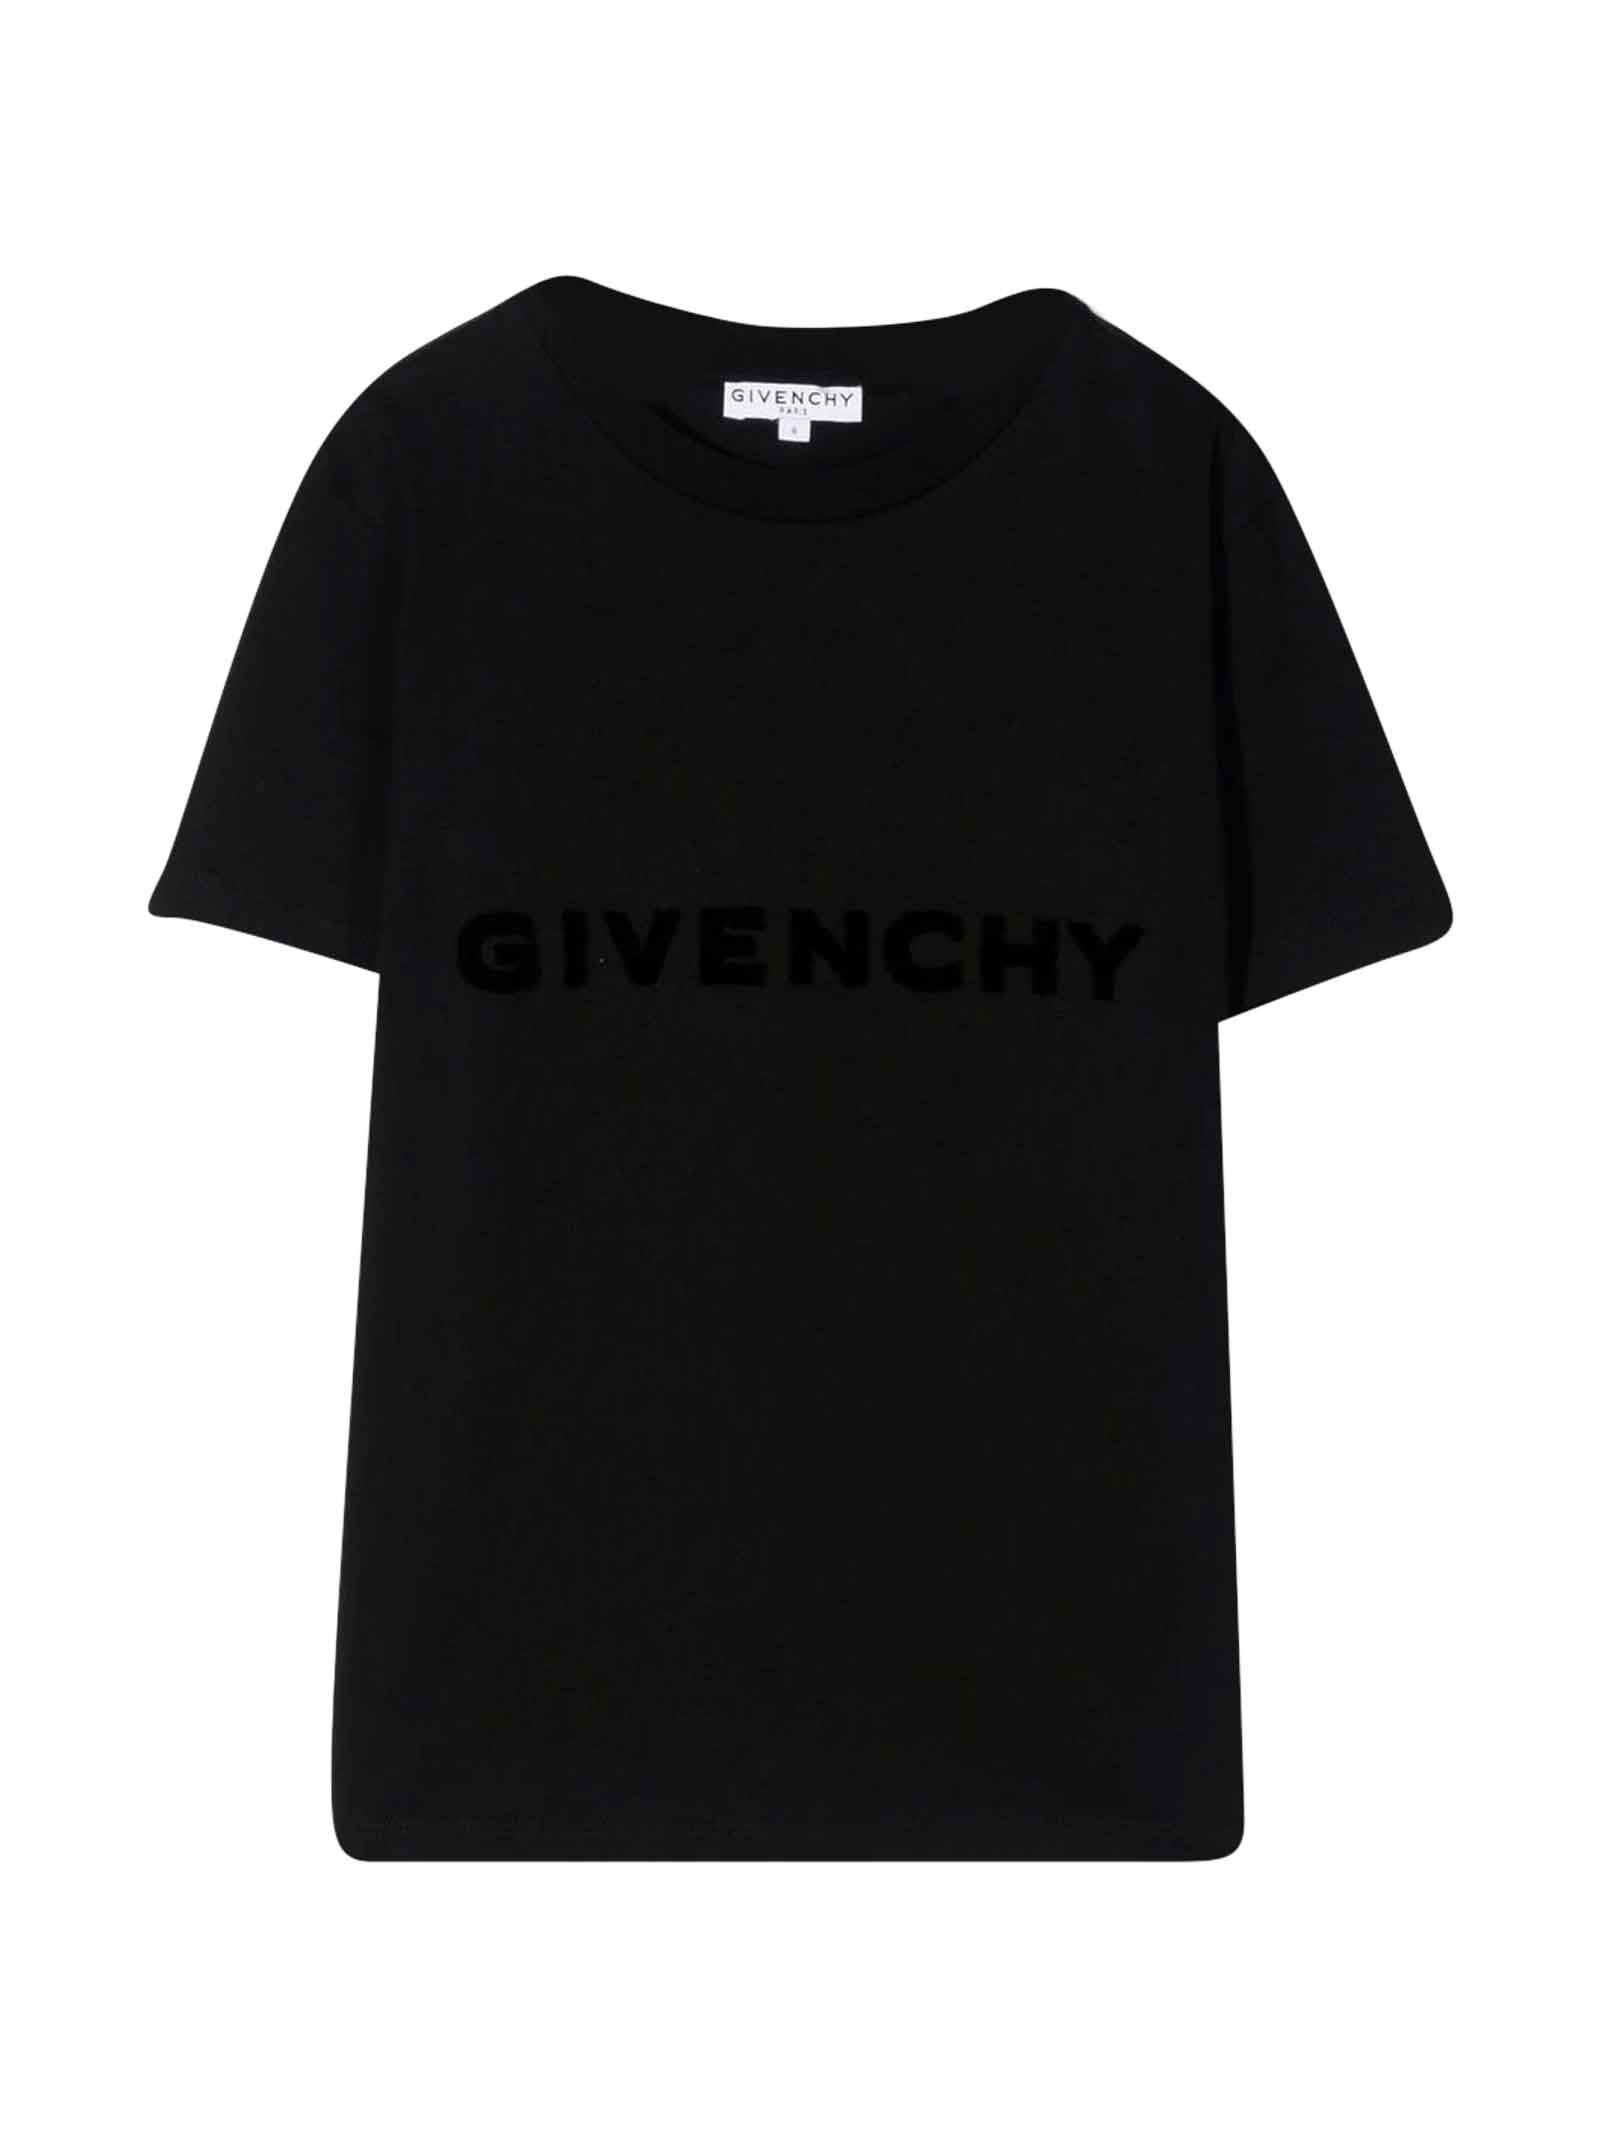 Givenchy Boy T-shirt From Embroidered.3d Details, Distinctive 4g Motif, Round Neckline, Short Sleeves And Straight Hem.